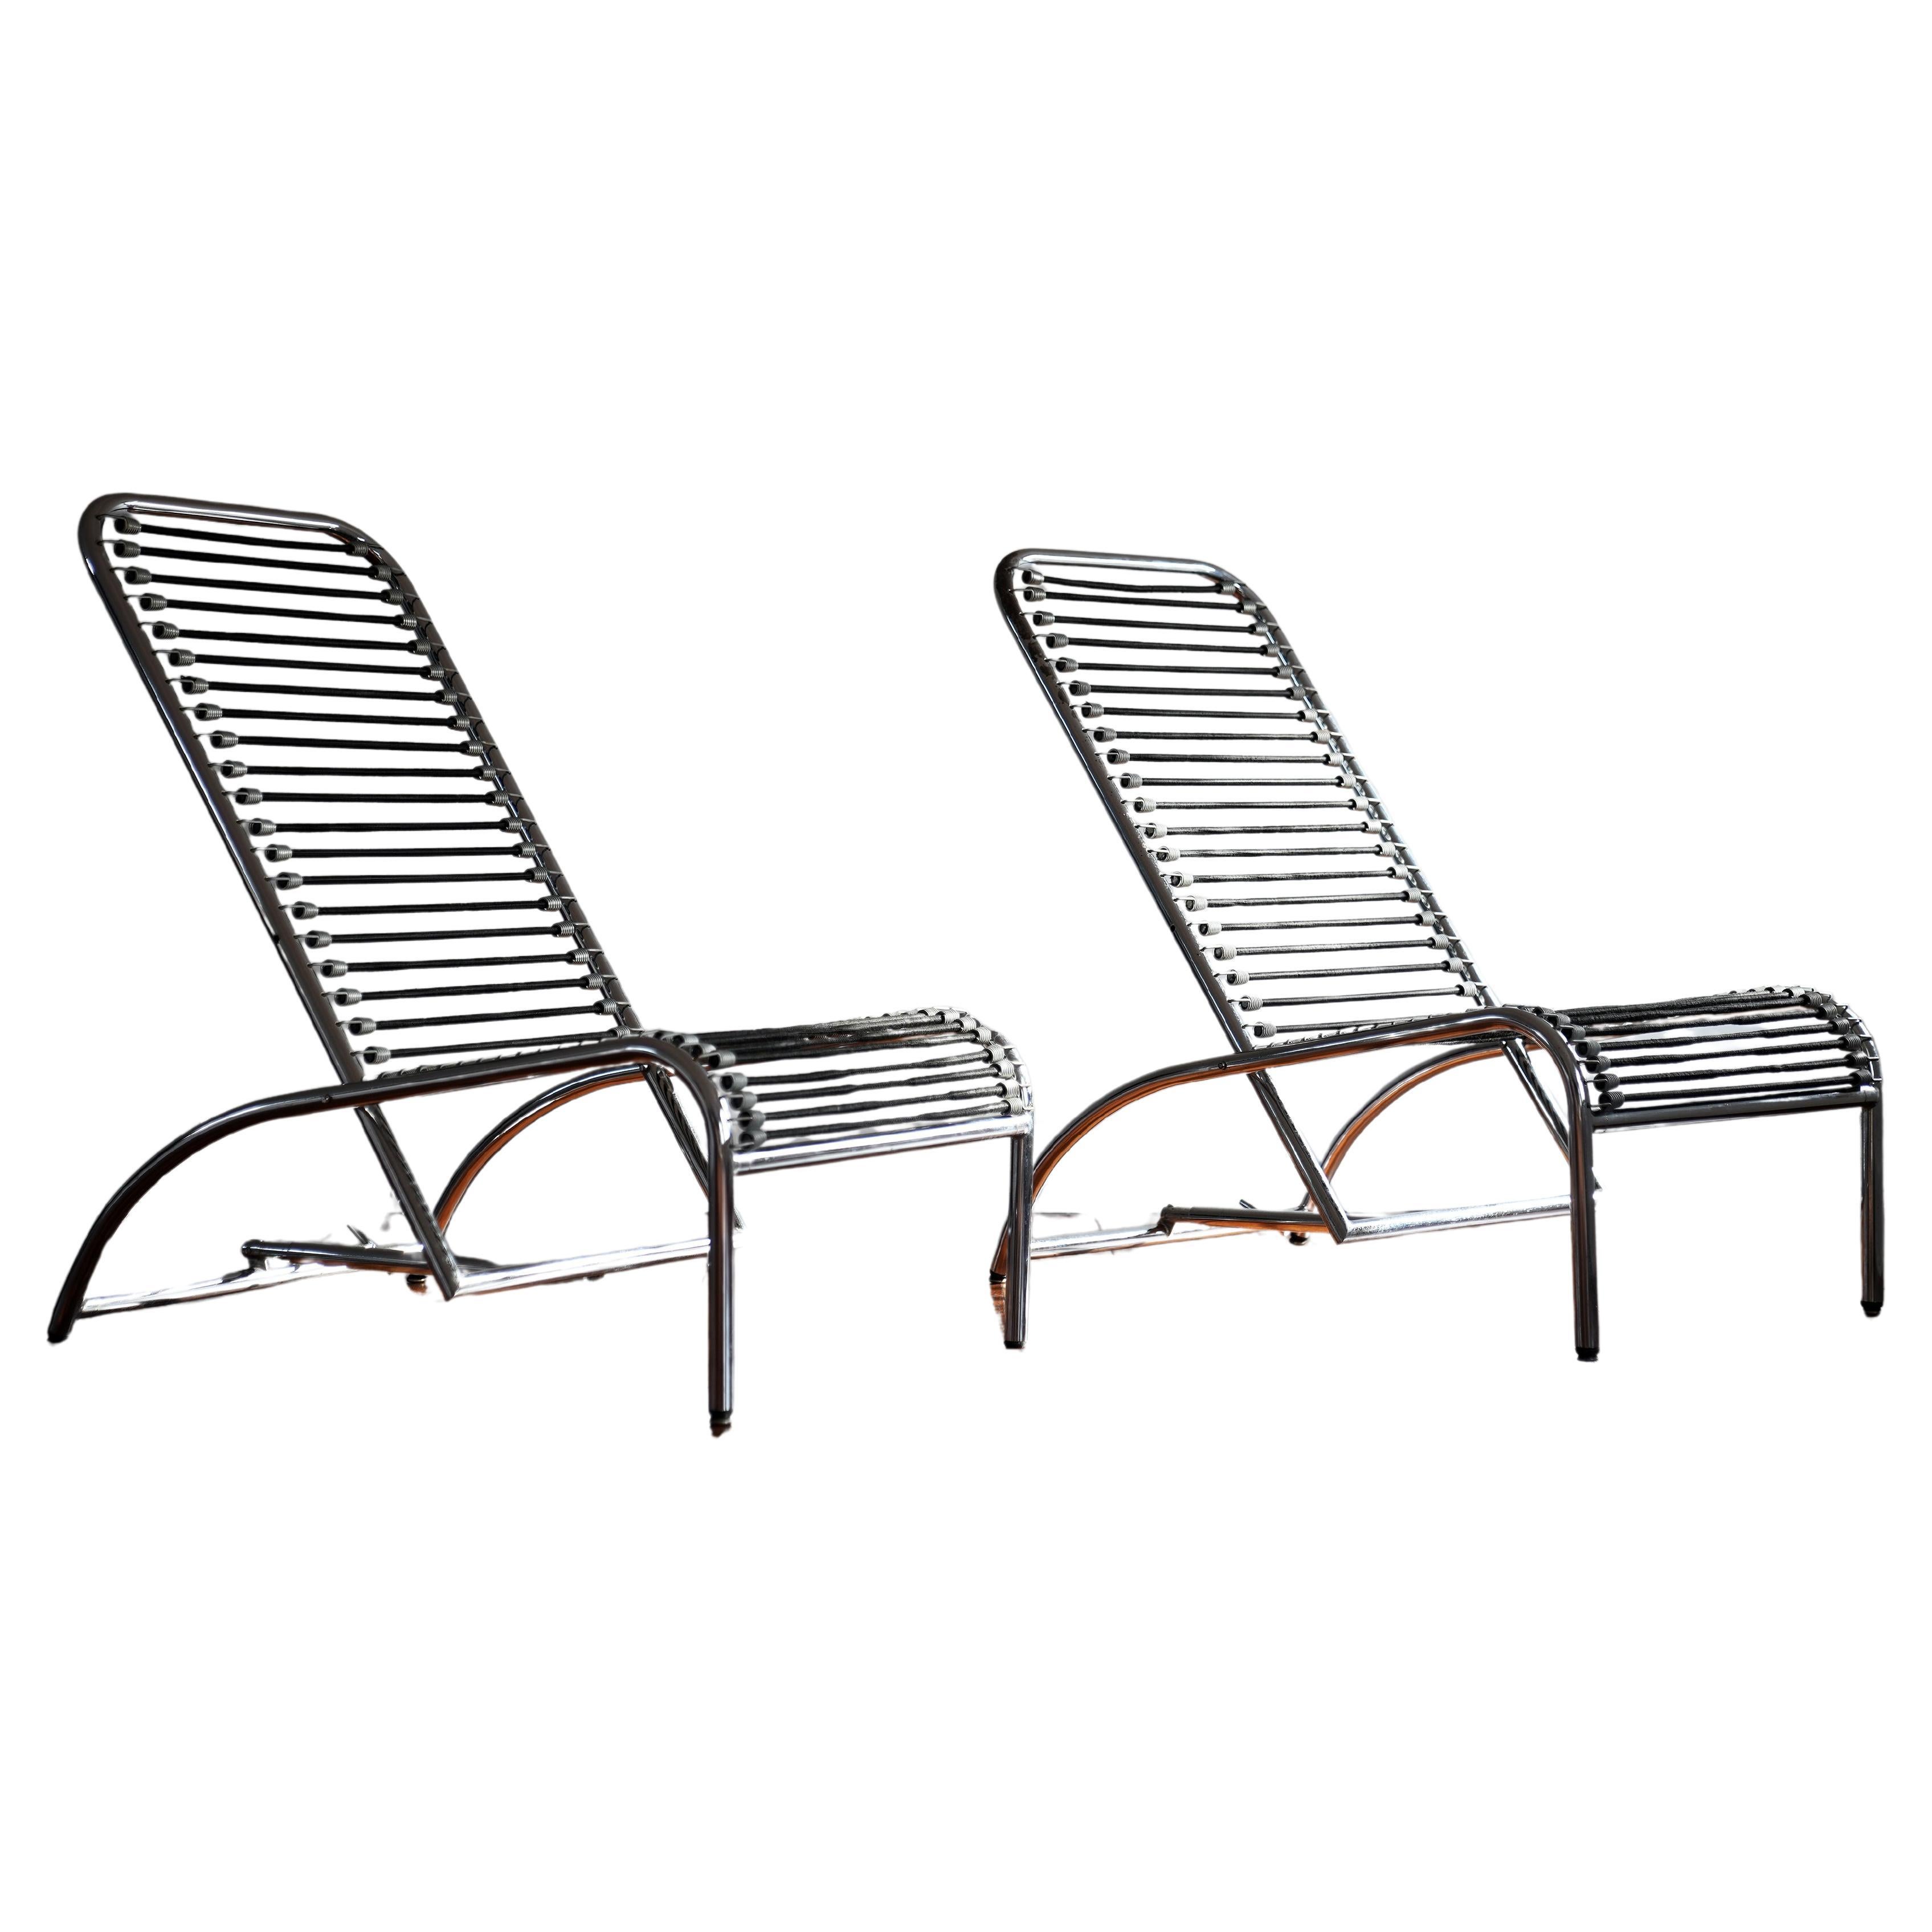 René Herbst, French Bauhaus Chairs